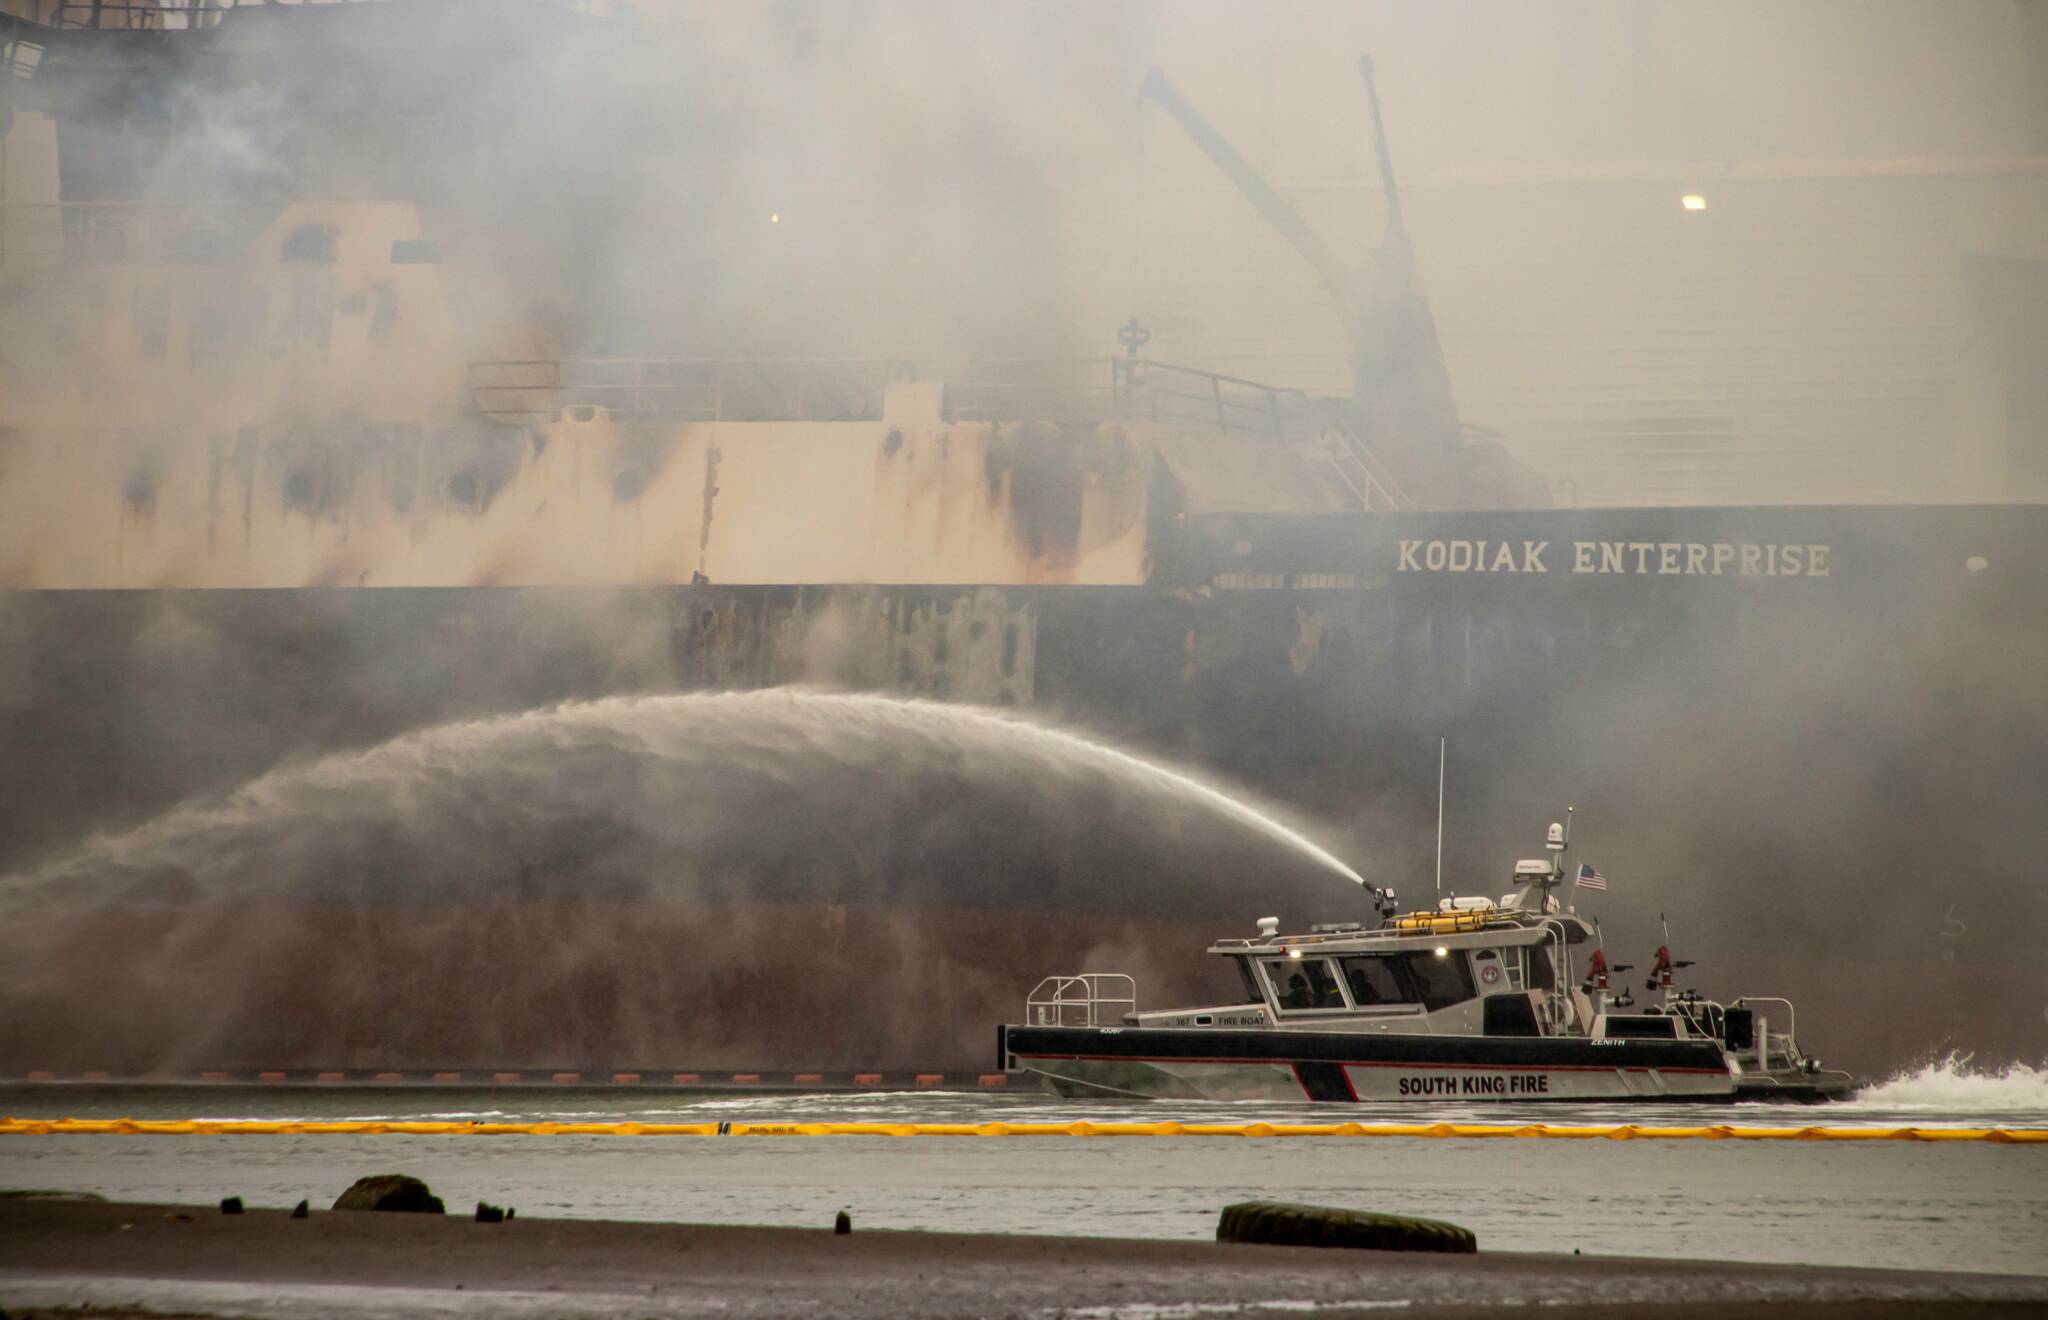 A vessel in Tacoma caught fire early on April 8 and continues to smolder as of April 10. Several local fire agencies, including South King Fire and Rescue, responded to assist with the incident. Photo courtesy of South Sound Media